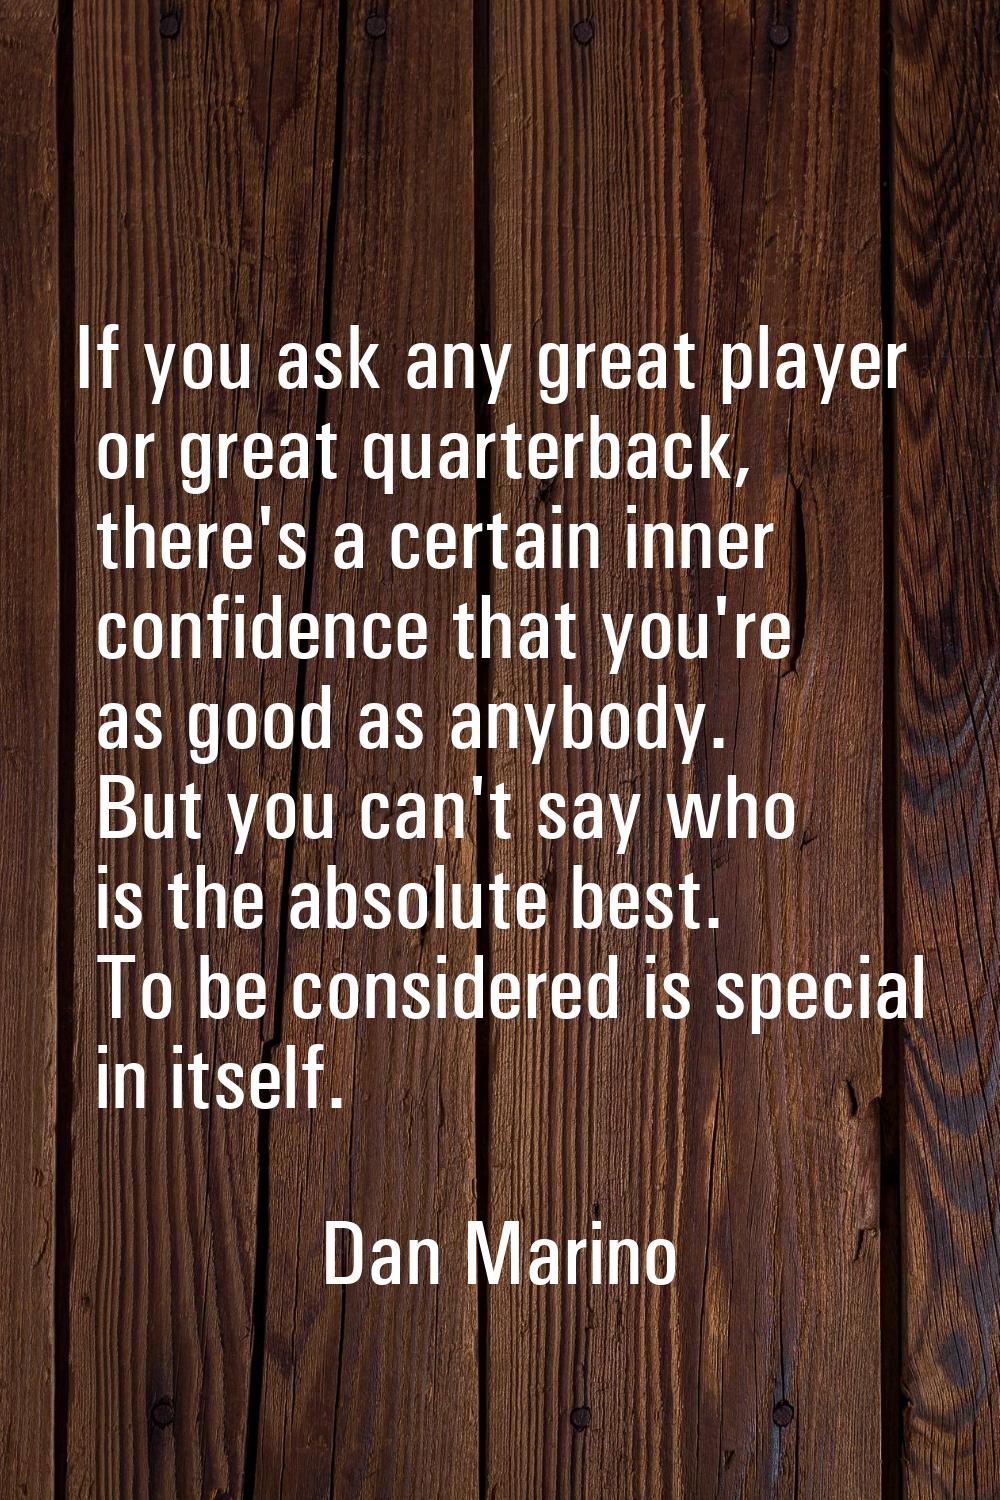 If you ask any great player or great quarterback, there's a certain inner confidence that you're as